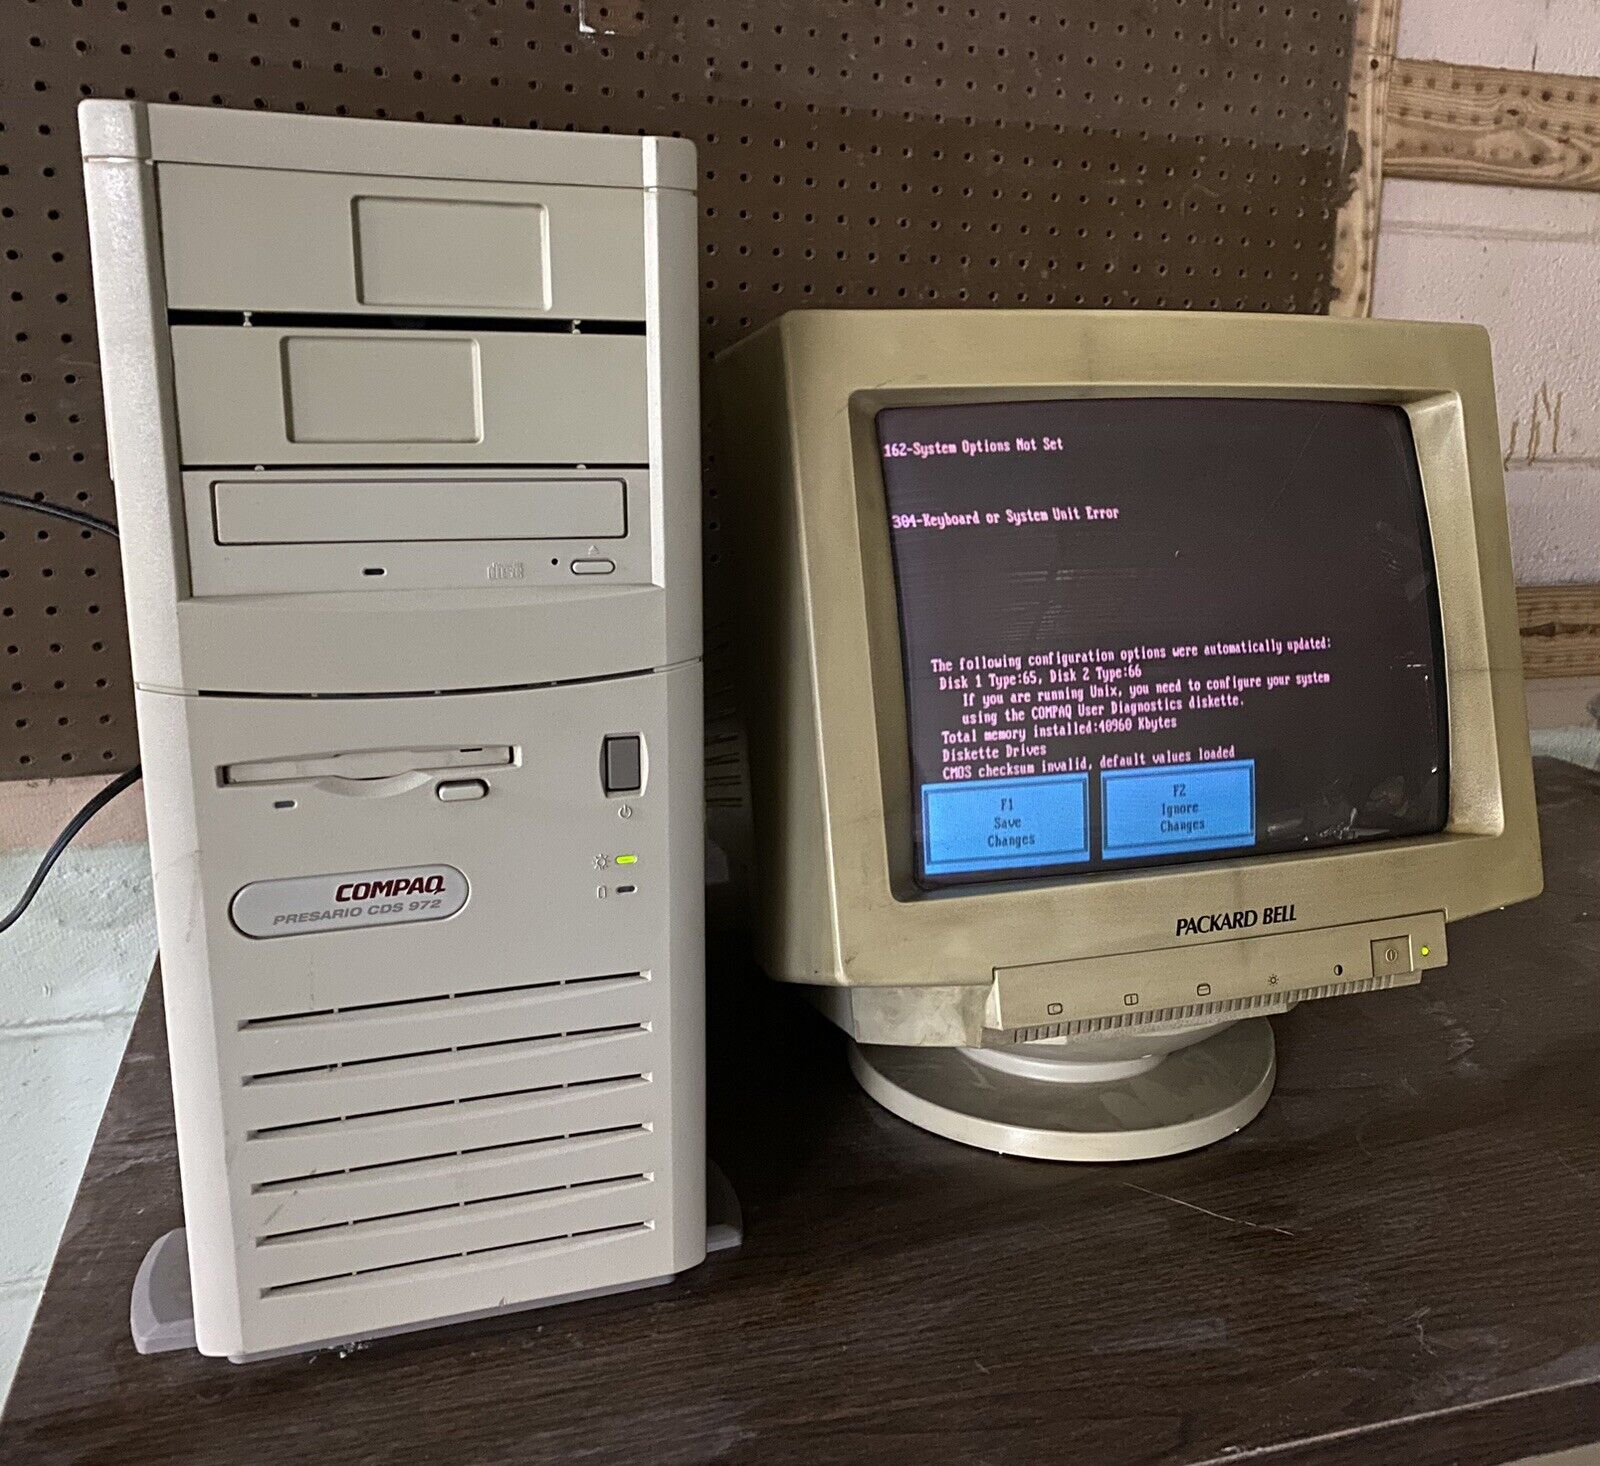 Compaq Presario CDS 972 tower vintage computer beige PC with 40MB RAM, no HDD